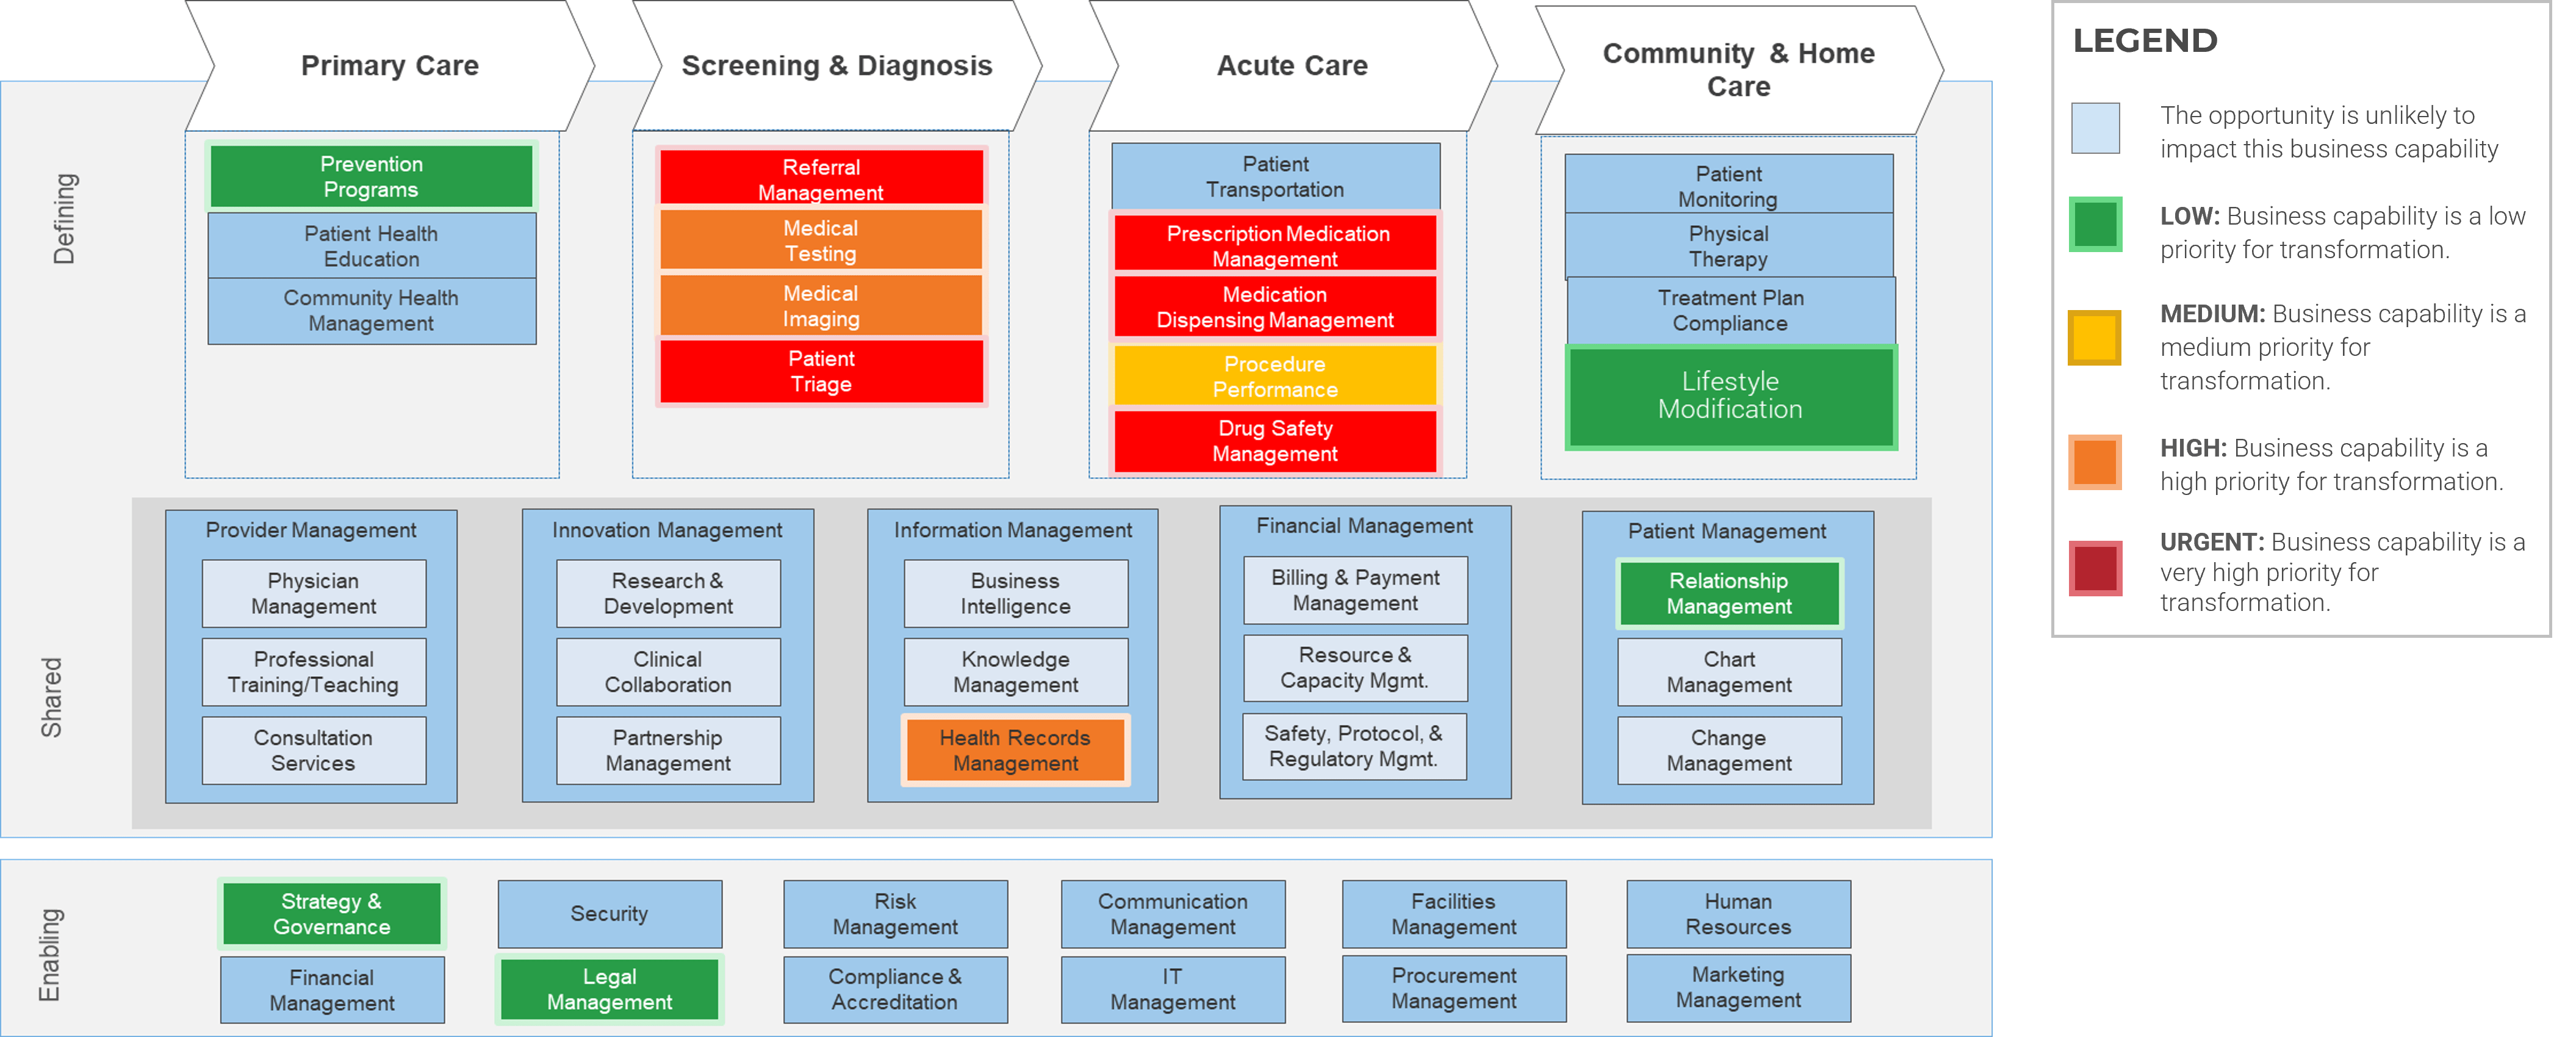 The image contains a screenshot of the exemplar prioritized business capability map.